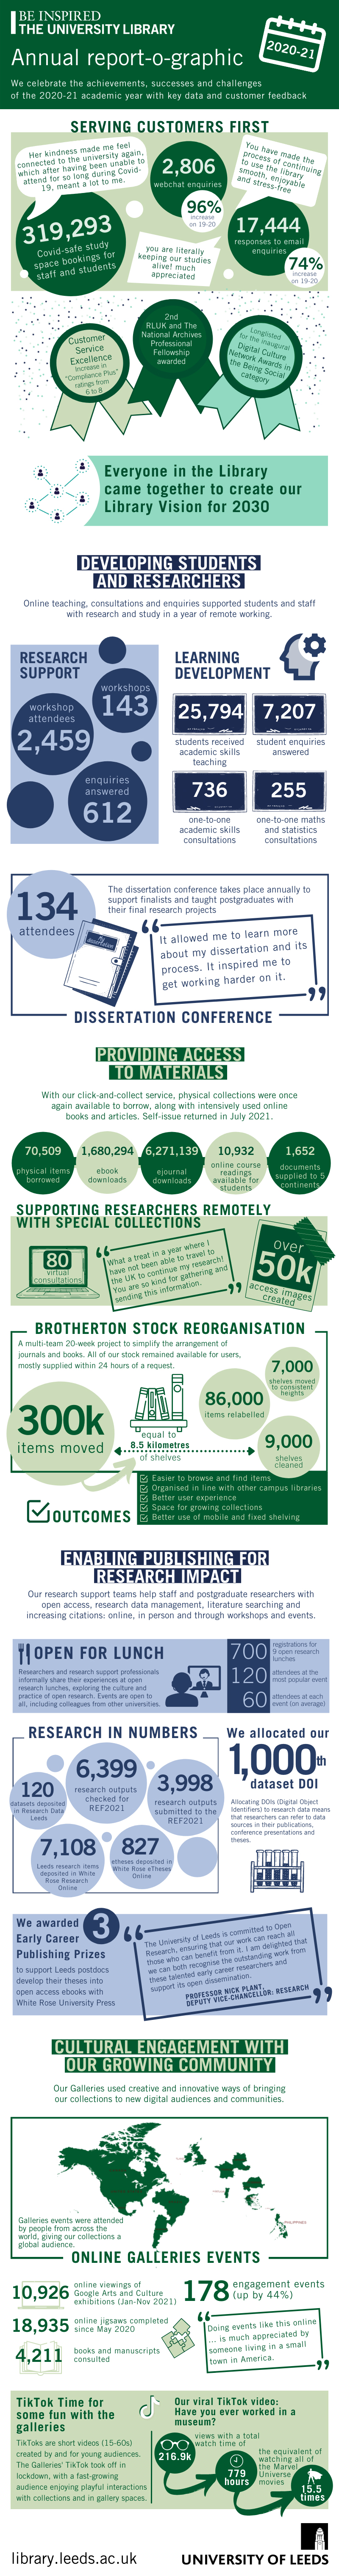 Infographic of library annual report: text version in following pages